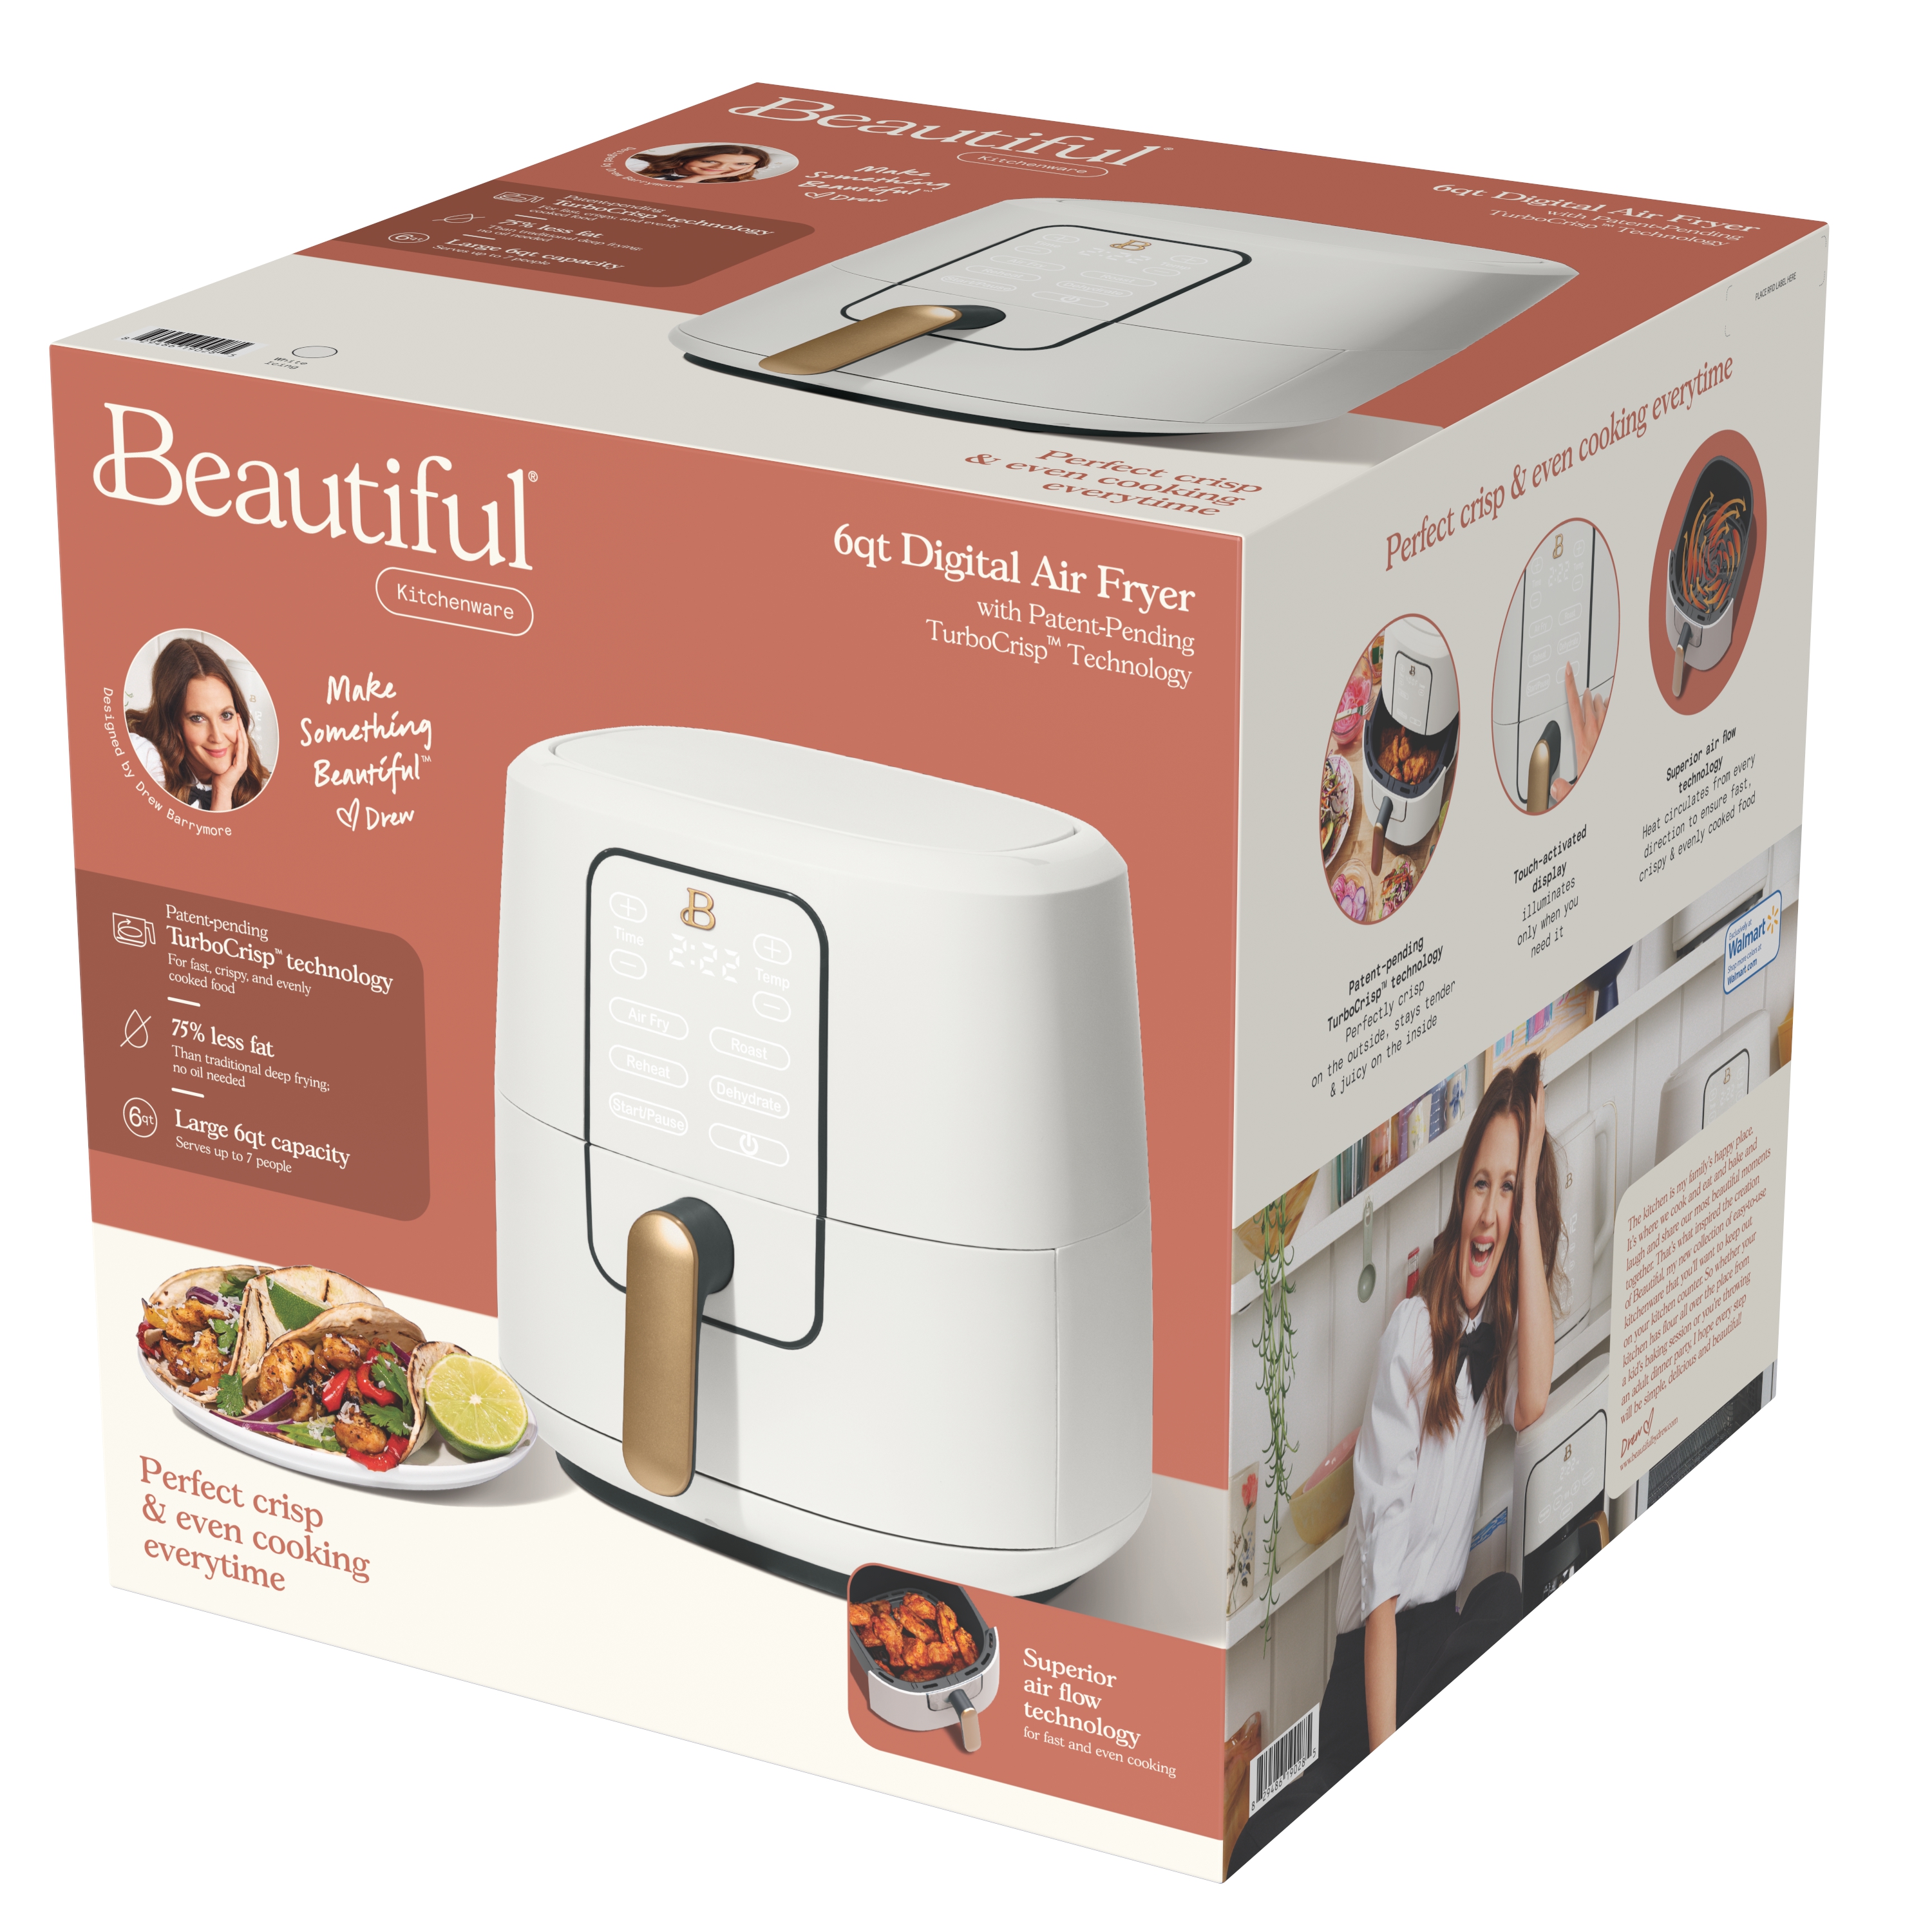 Beautiful 6 Qt Air Fryer with TurboCrisp Technology and Touch-Activated Display, White Icing by Drew Barrymore - image 4 of 9